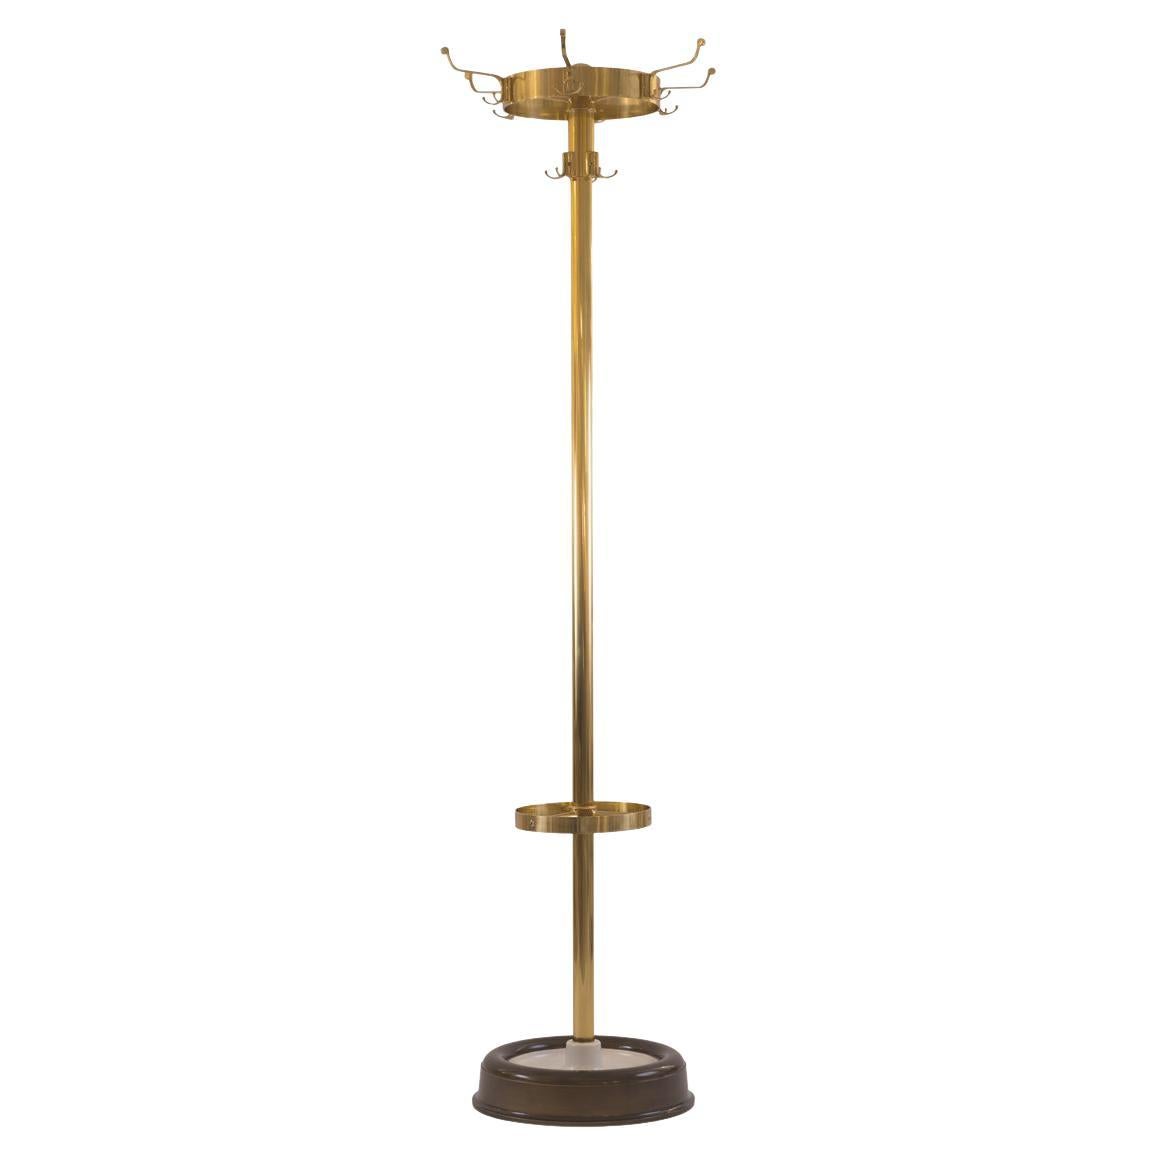 Very Elegant Viennese 50ies Coatstand Pictured in a Semigloss Finish, Re Edit For Sale